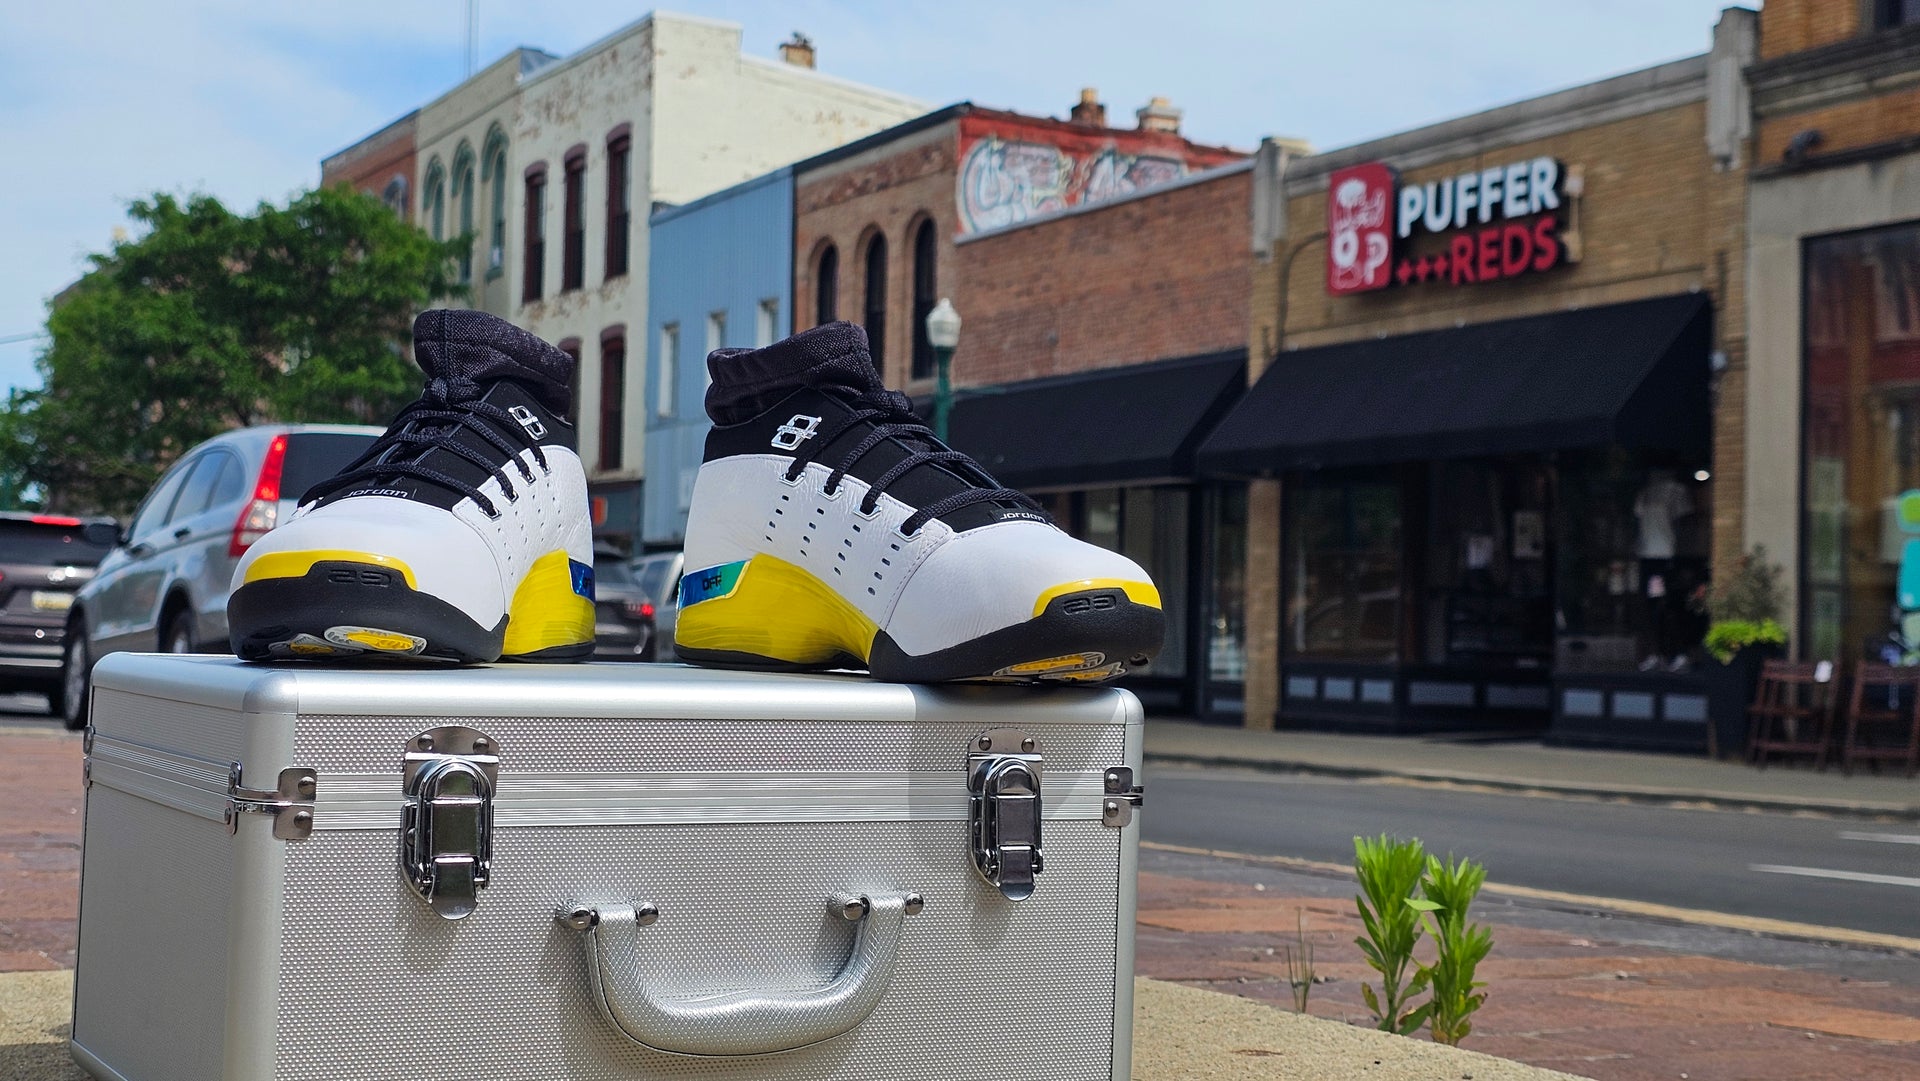 Air Jordan 17 Retro Low SP drops exclusively at Puffer Reds!!